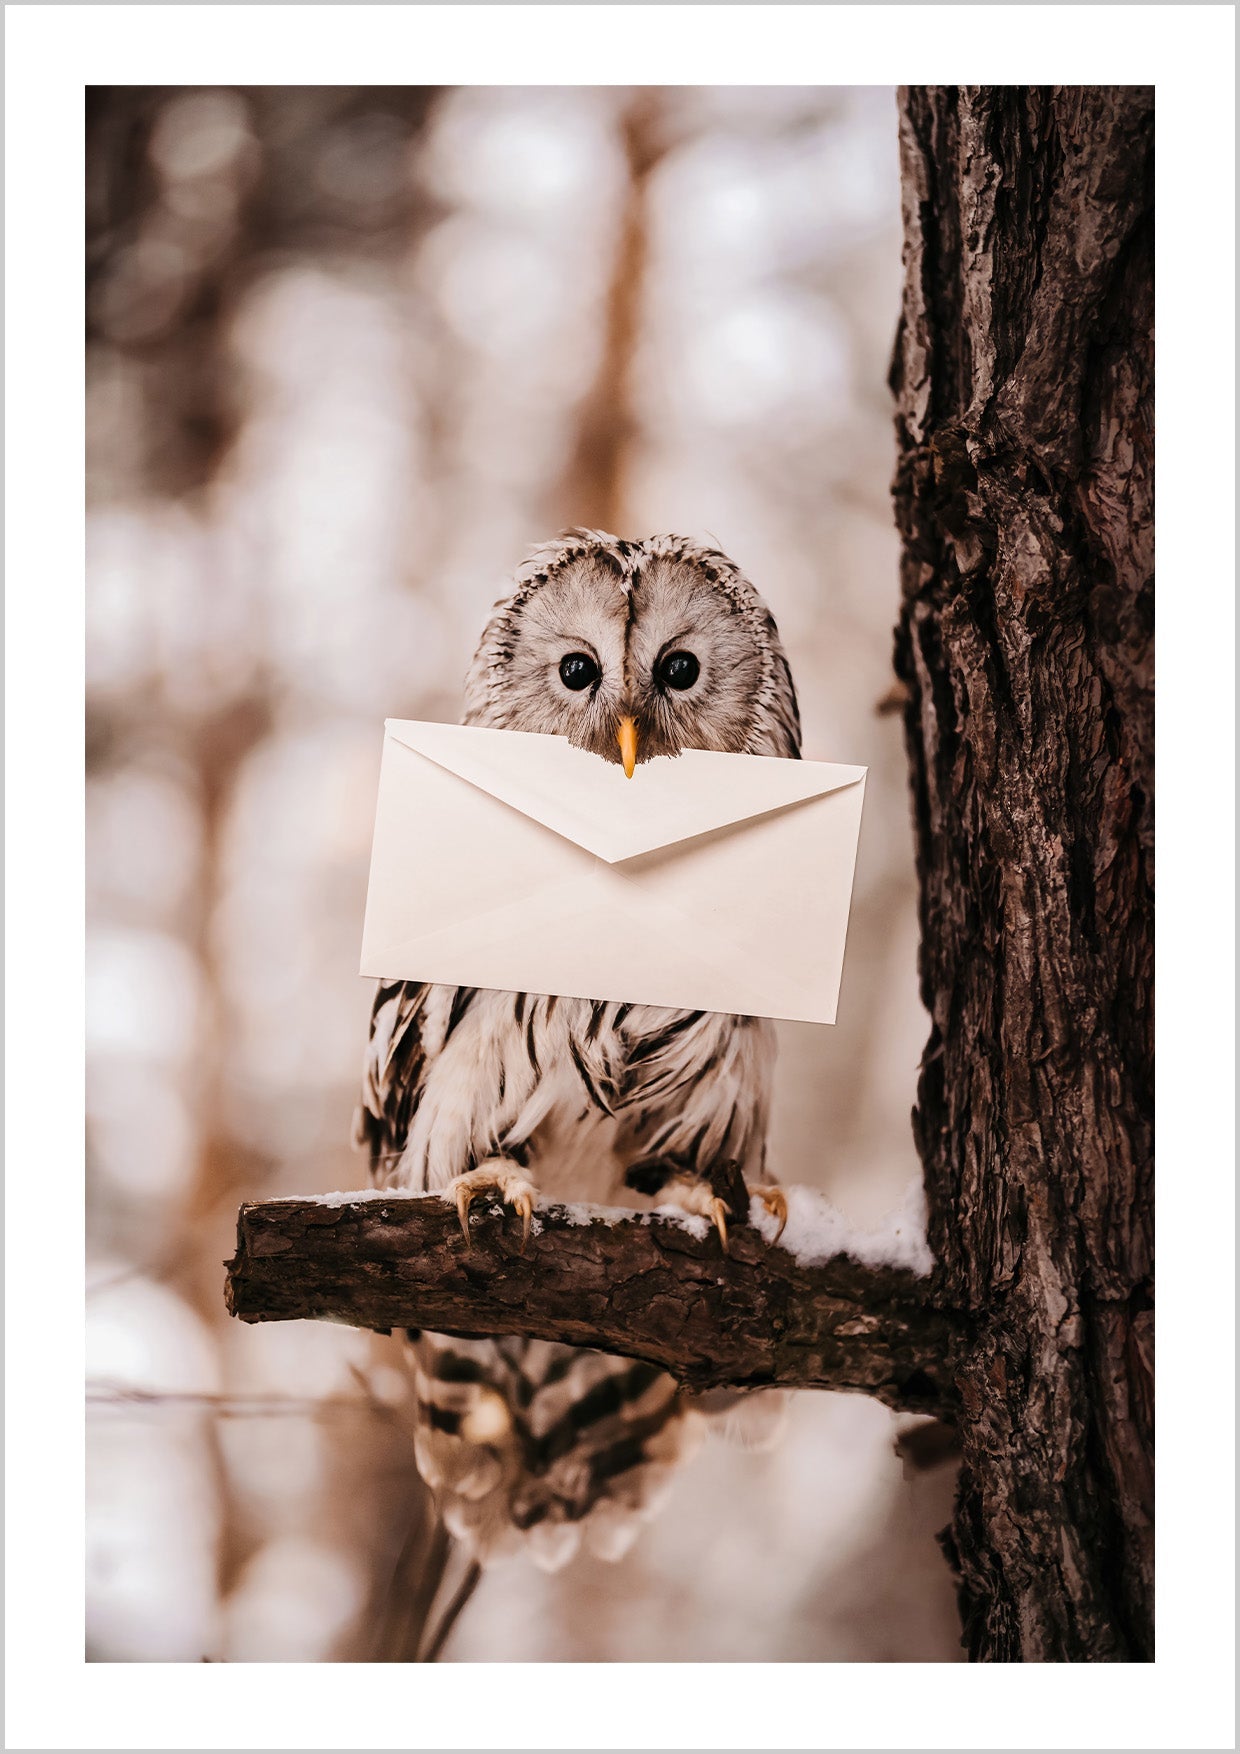 Photo Poster with an owl holding a letter. The owl is a symbol of wisdom and mystery. It's sitting on a branch and the big eyes are looking forward. Hang this Poster in your living room, bedroom, or study to let the mystical presence fill your space with wonder.